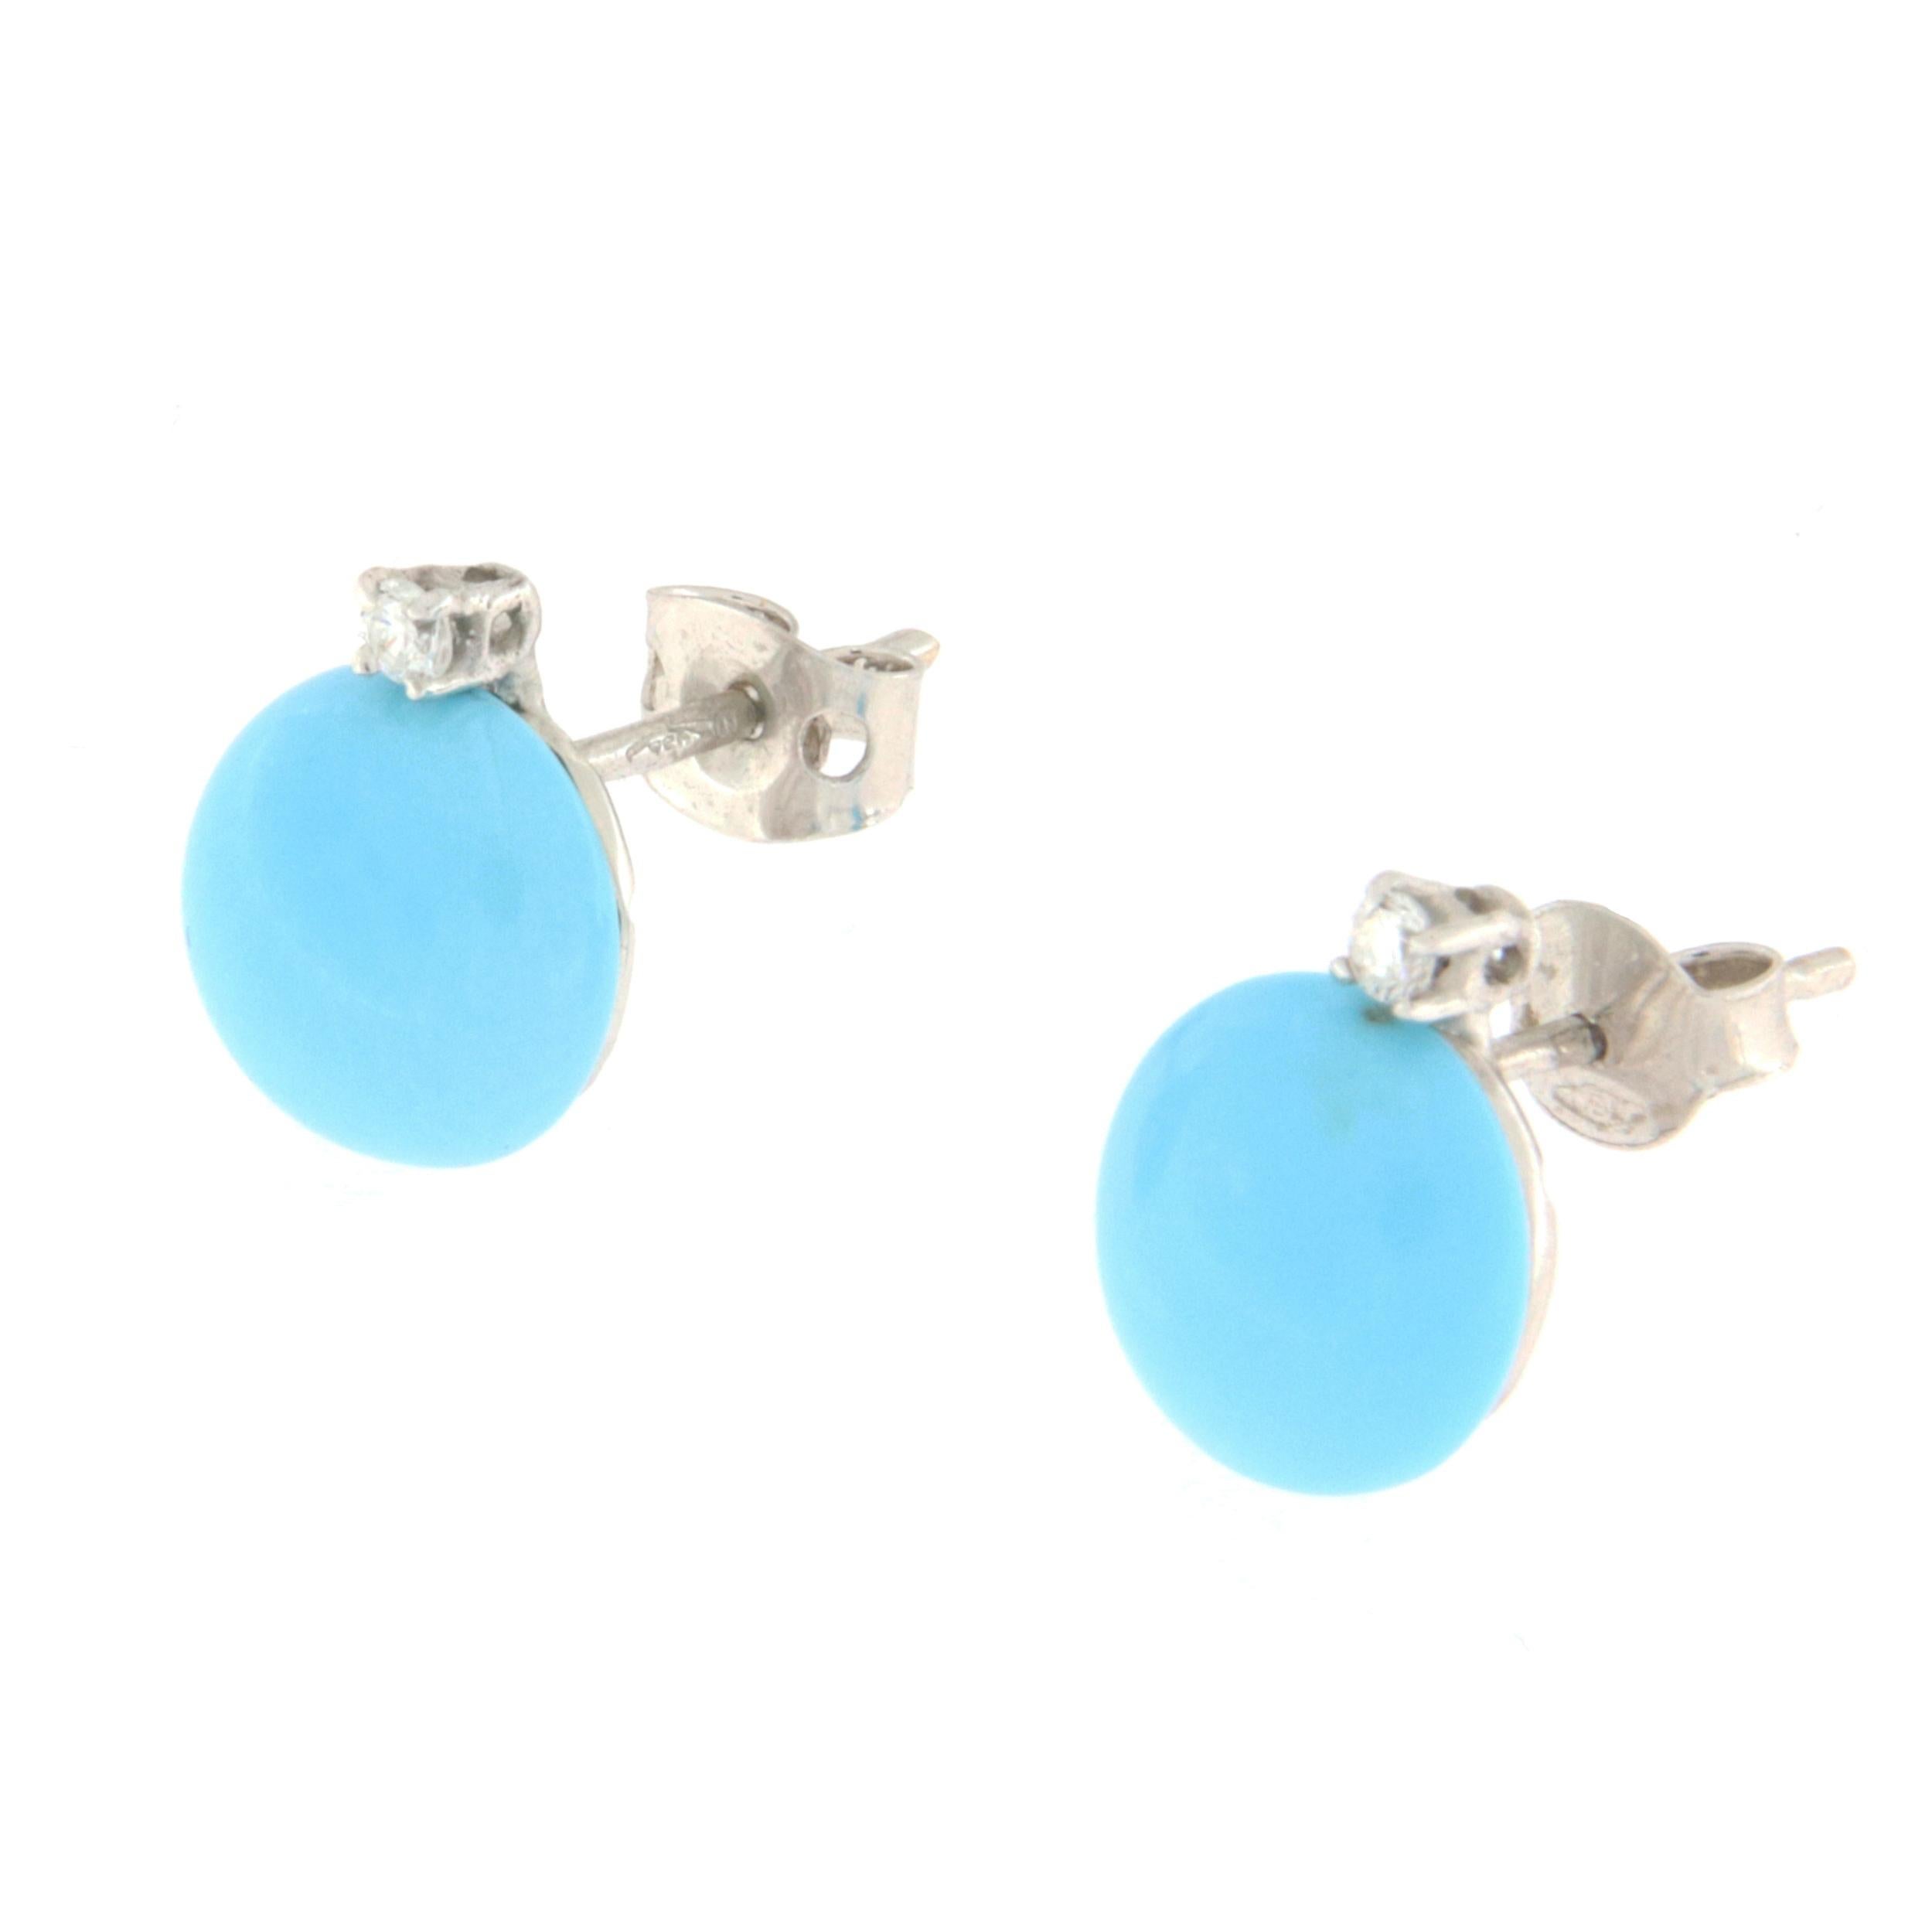 These sophisticated earrings in 18-karat white gold capture the essence of modern refinement, pairing the purity of white gold with the natural beauty of turquoise. Each earring is adorned with an elegant natural turquoise button, whose blue hue